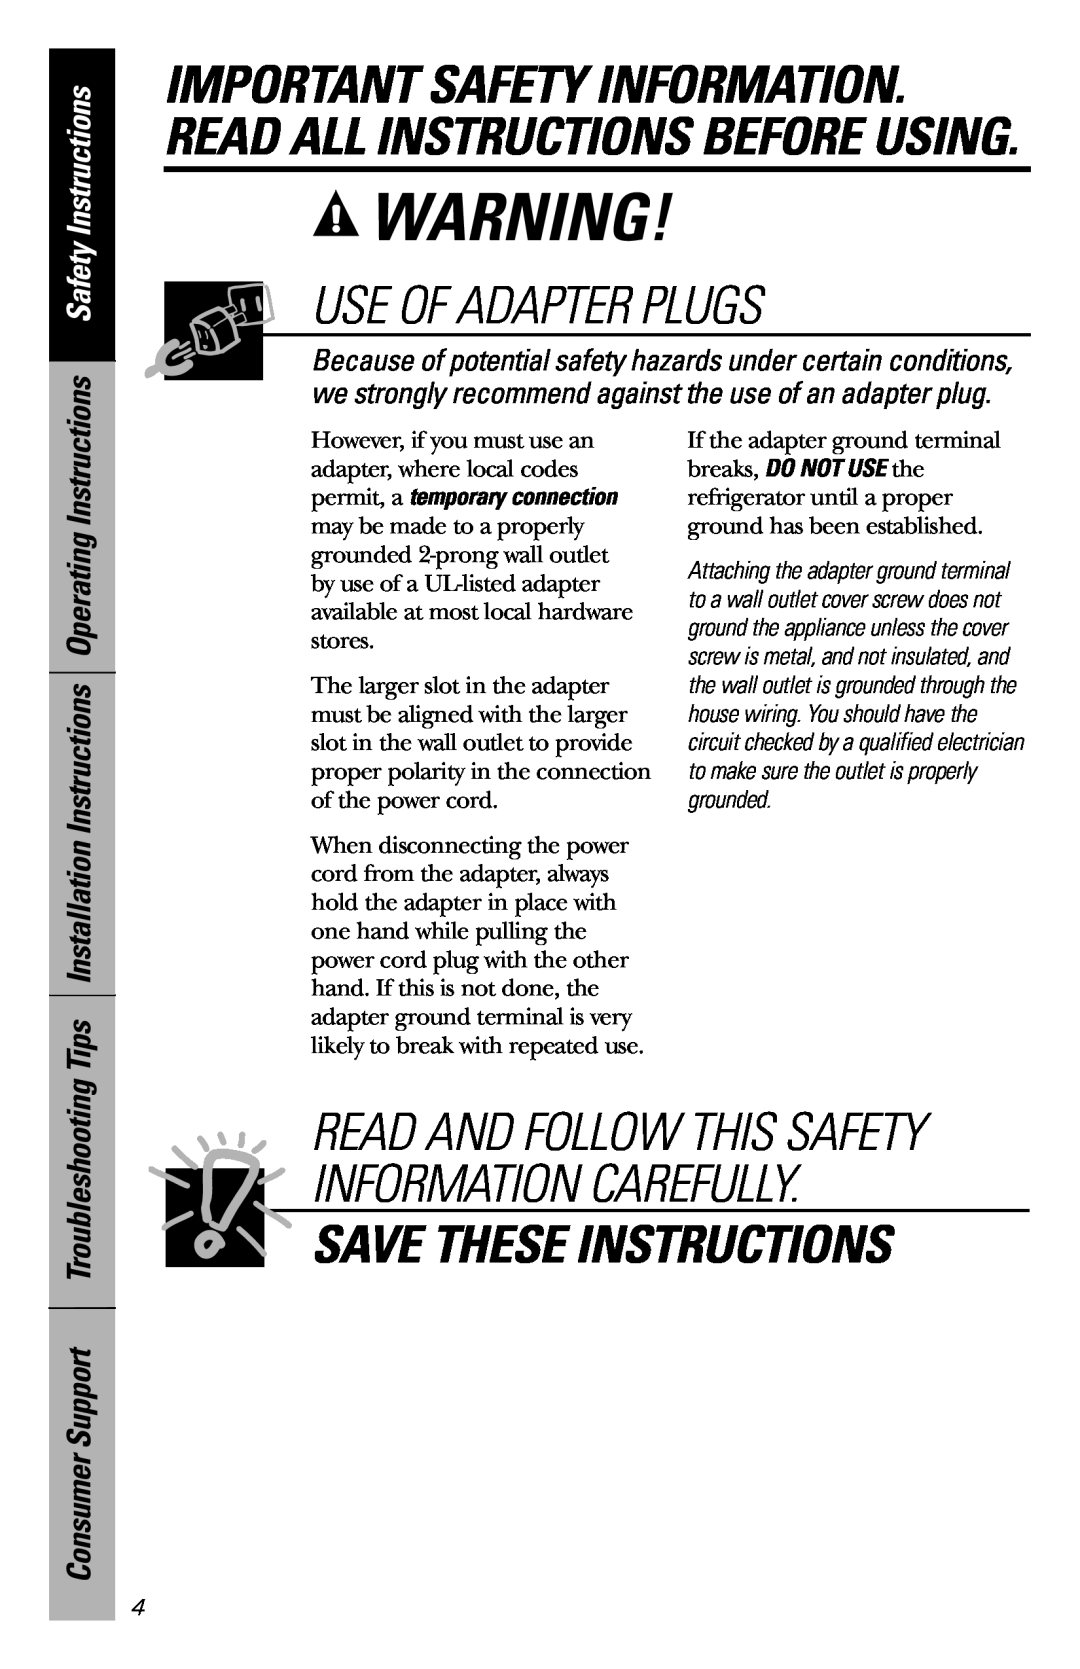 GE 197D5616P001 Use Of Adapter Plugs, Consumer Support Troubleshooting, Save These Instructions, Safety Instructions 